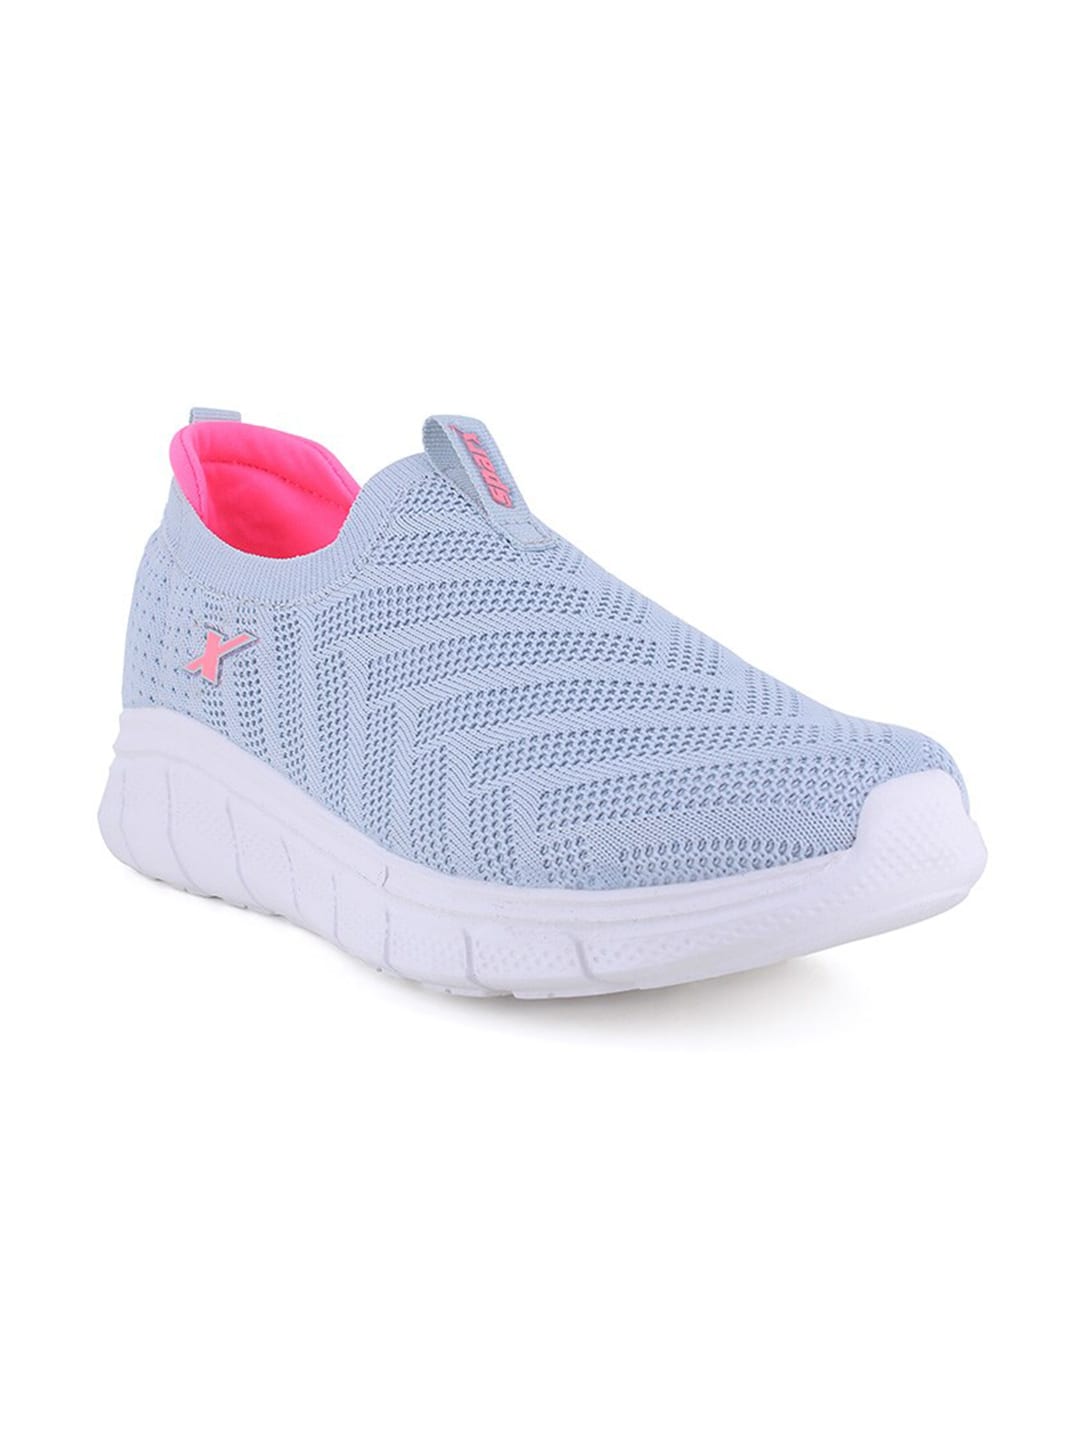 Sparx Women Grey Textile Running Non-Marking Shoes Price in India